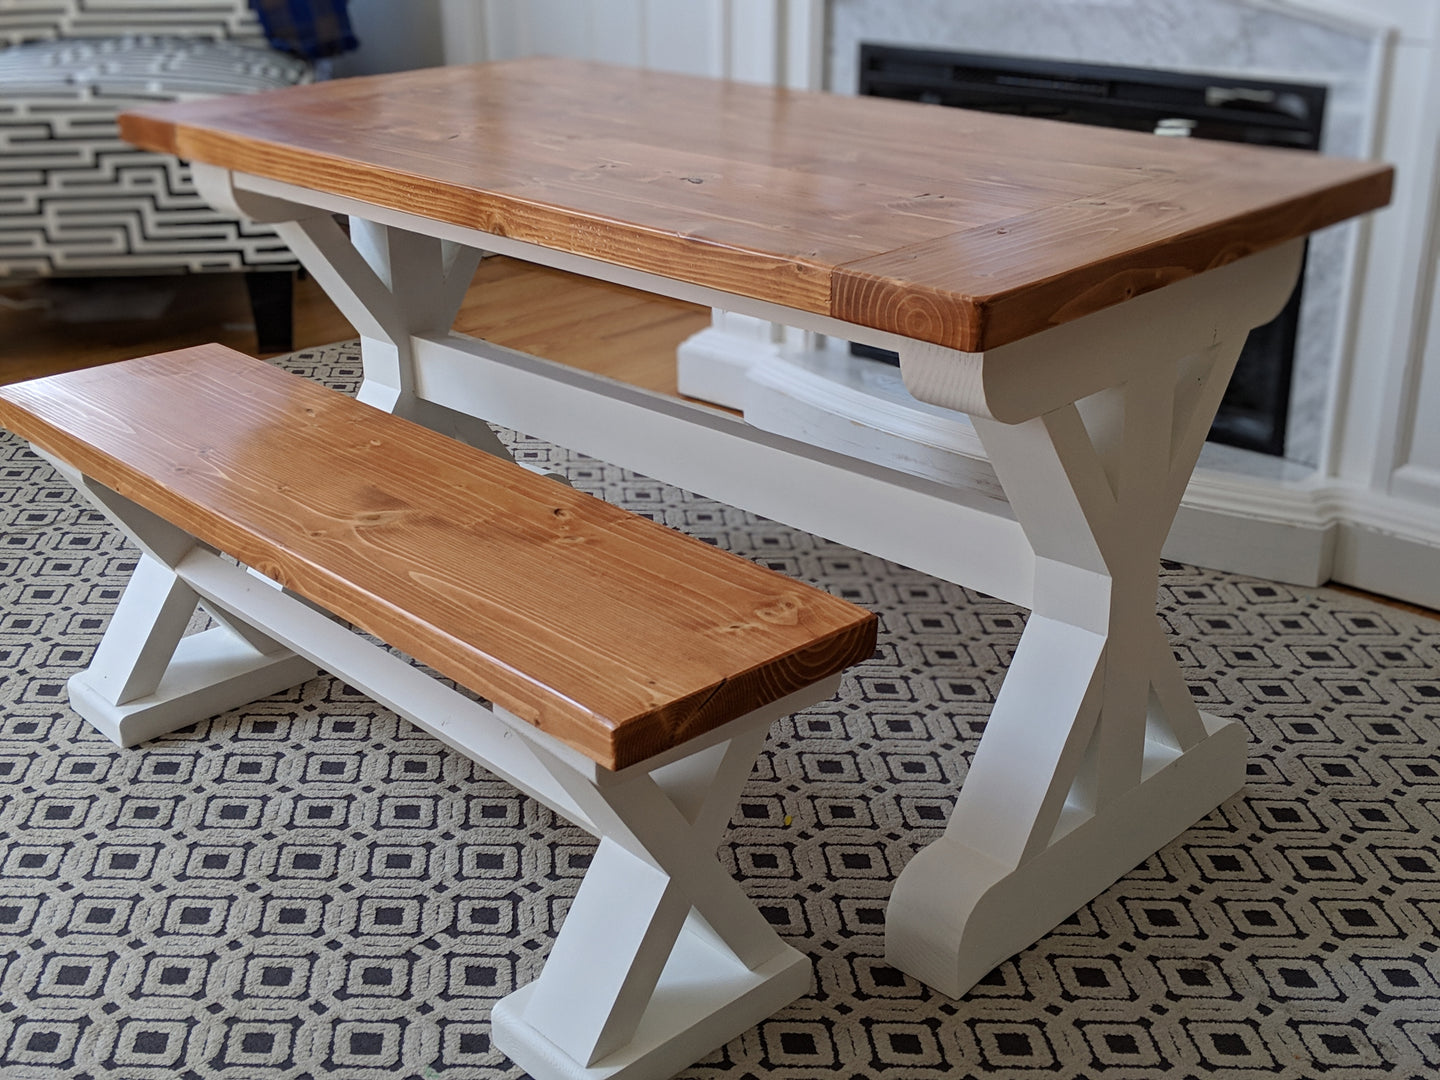 Custom designed and custom handcrafted kids dining table.  The perfect kids farmhouse table and bench or it could be the perfect kids farmhouse desk.  Custom handcrafted in Groton, MA using hand selected high quality lumber in Groton, MA.